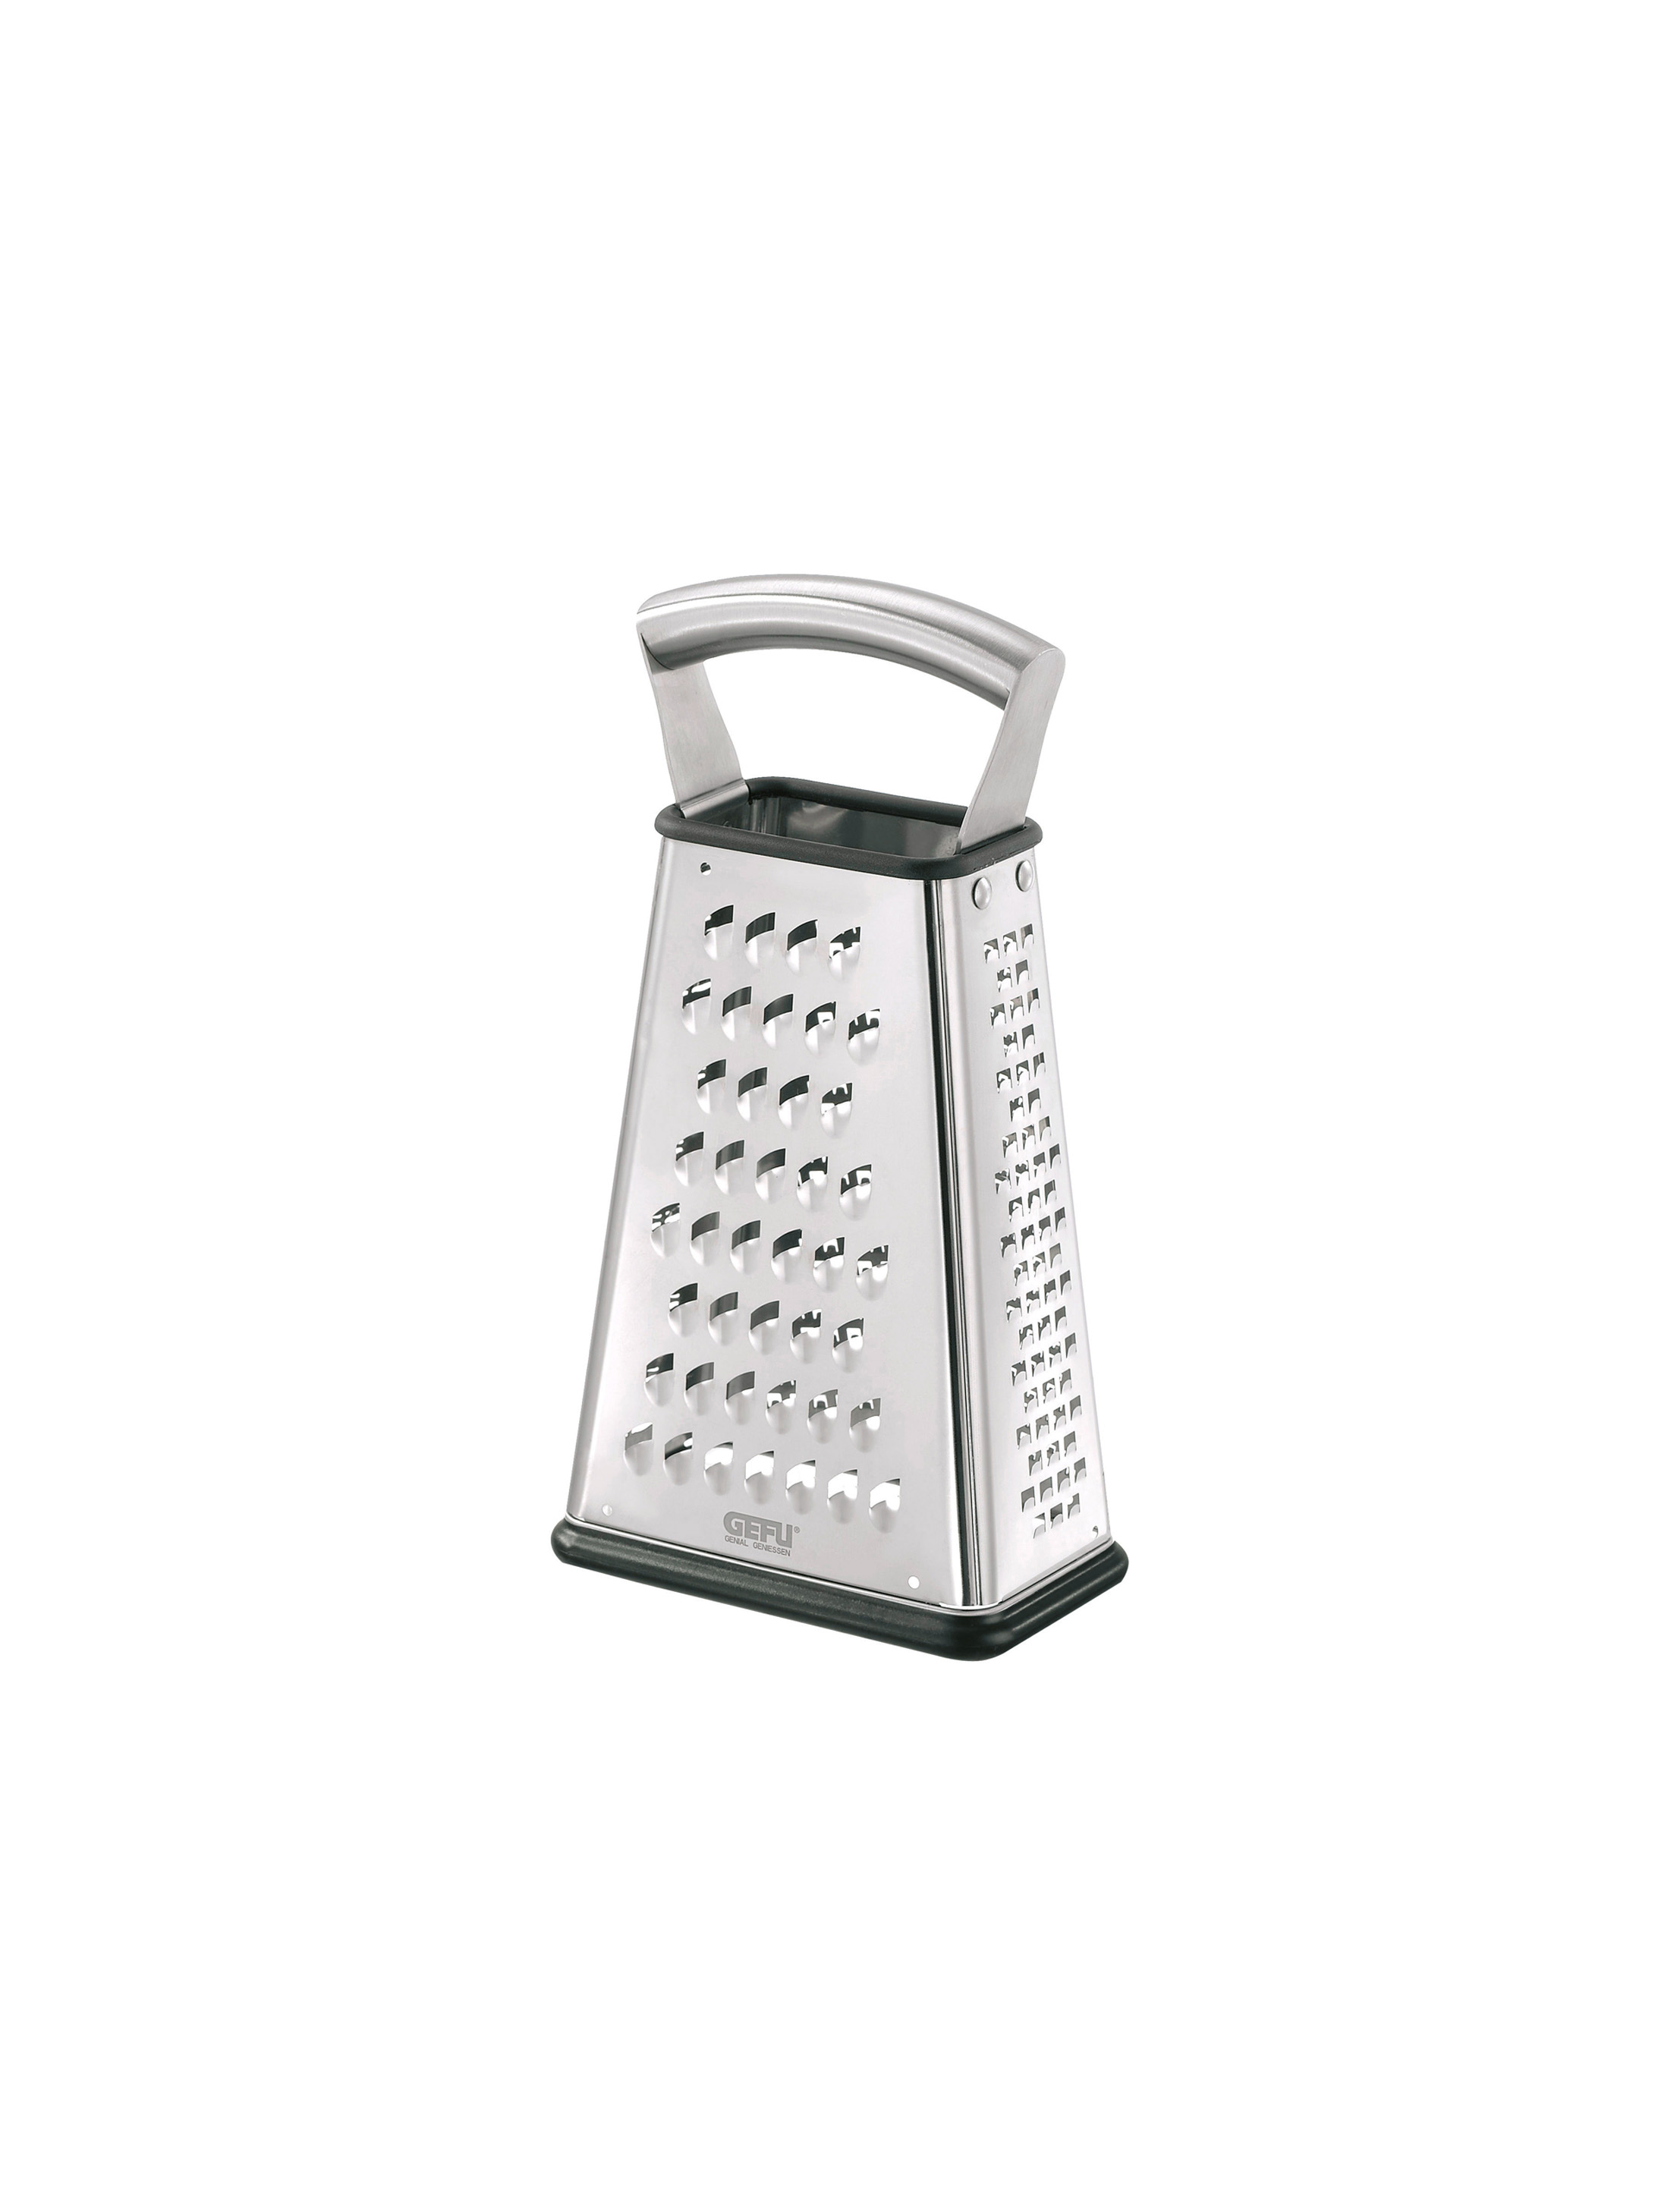 Four-way Grater VITALES